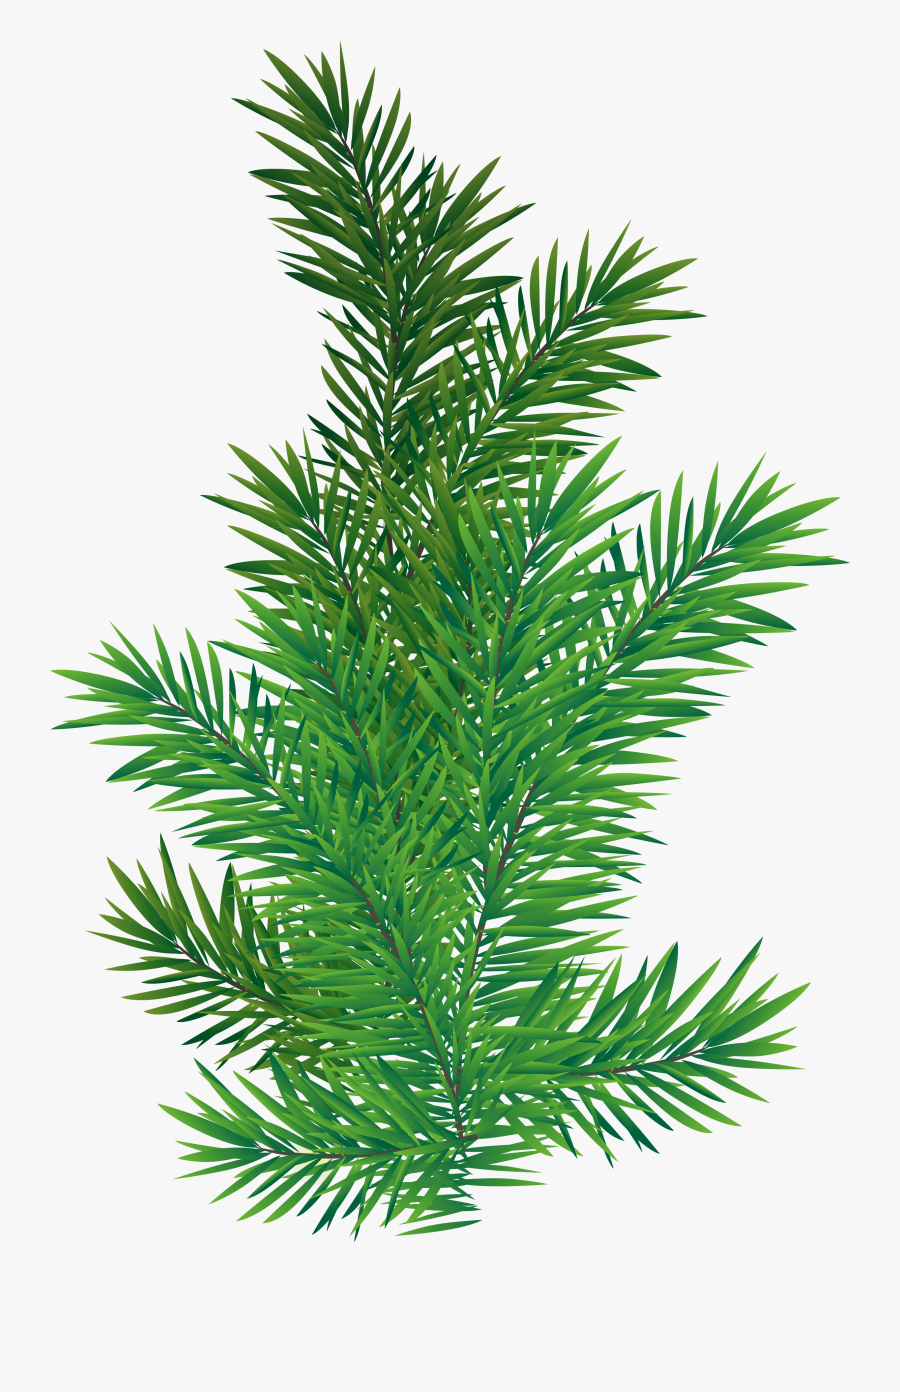 Pine Branch Png Picture Transparent Background - Pine Tree Leaf Png, Transparent Clipart